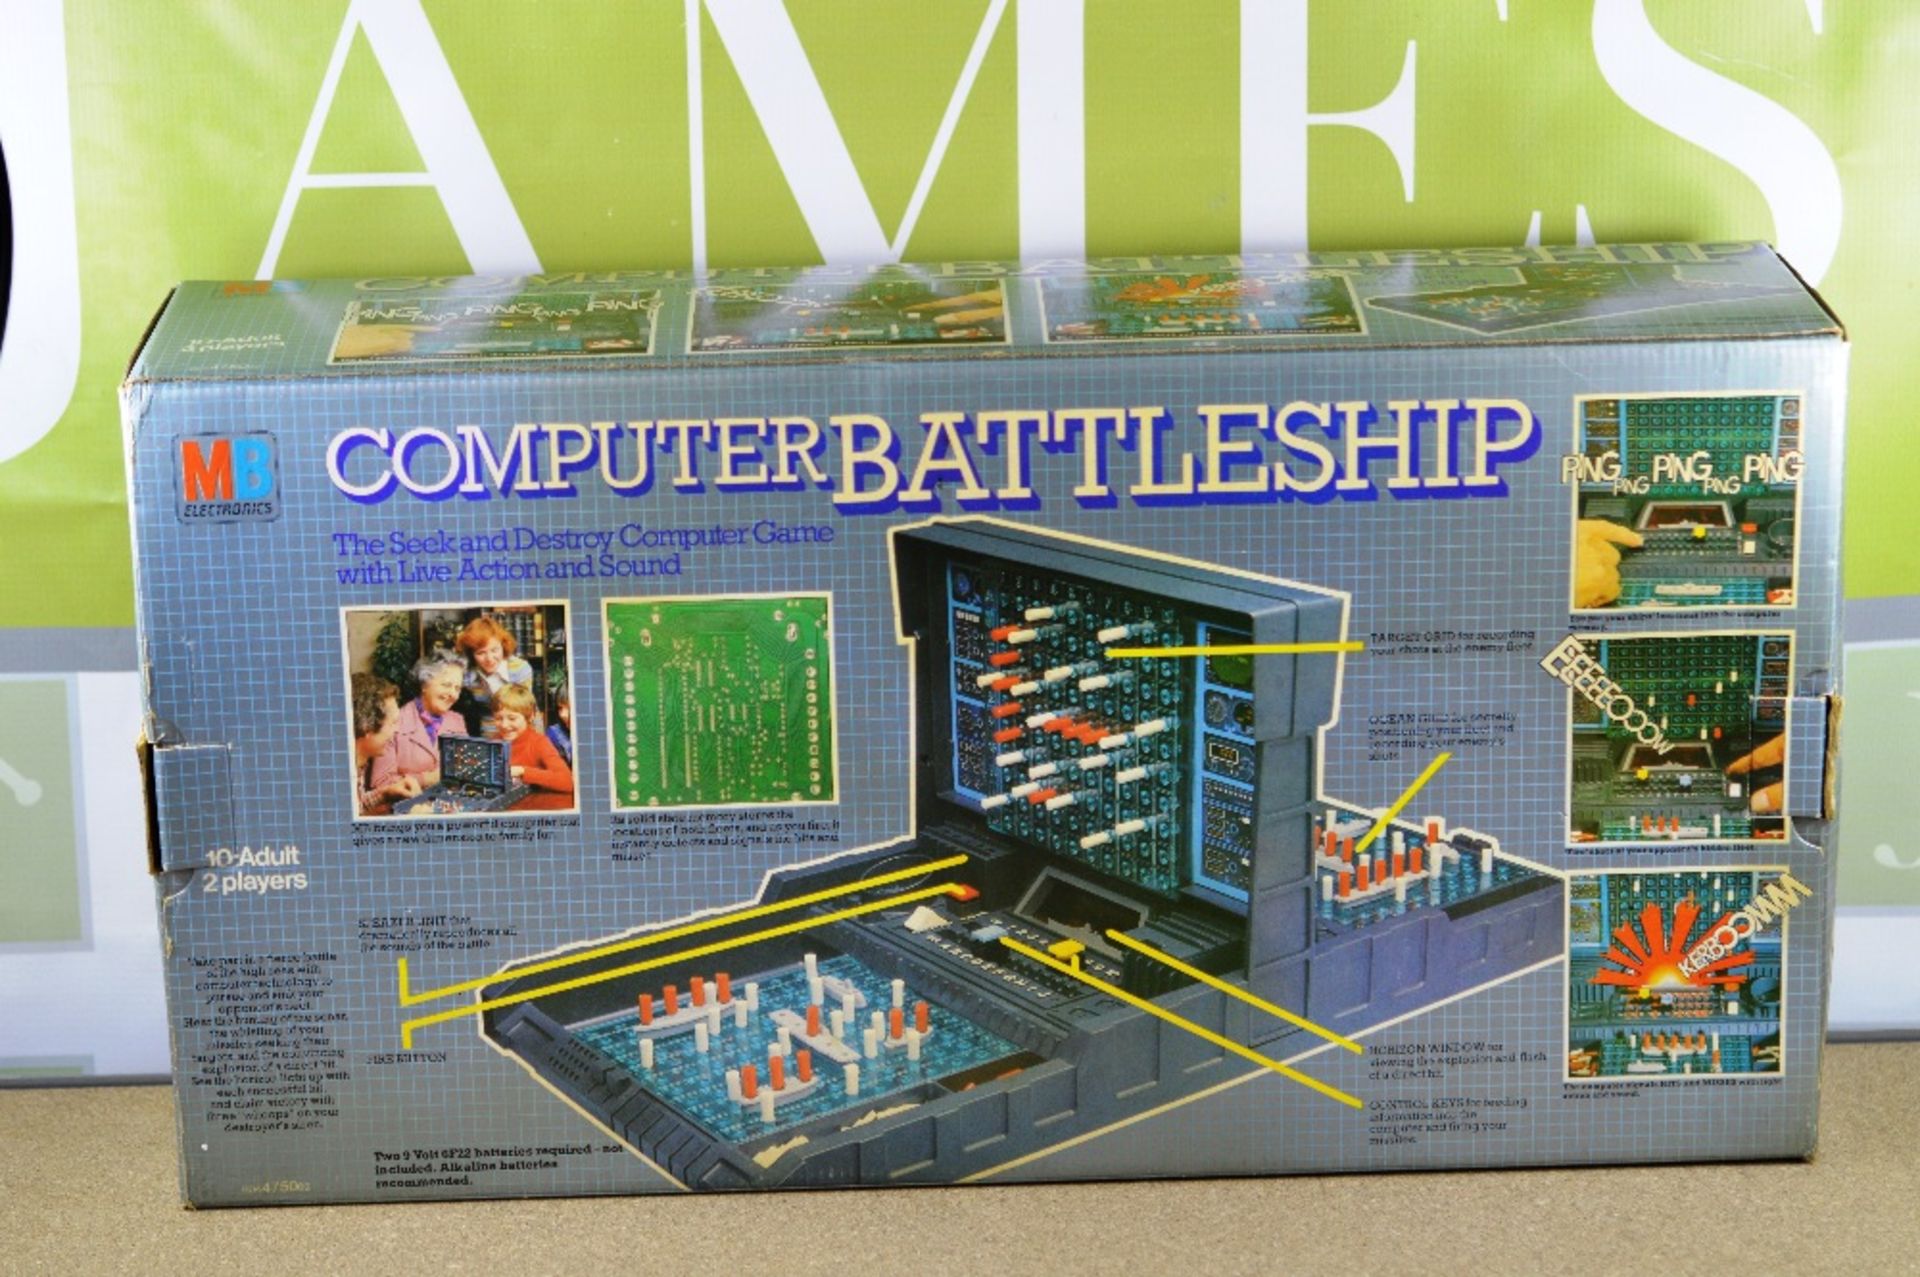 Vintage Computer Battleships game from 1977 by Milton Bradley (MB Electronics) - Image 2 of 2